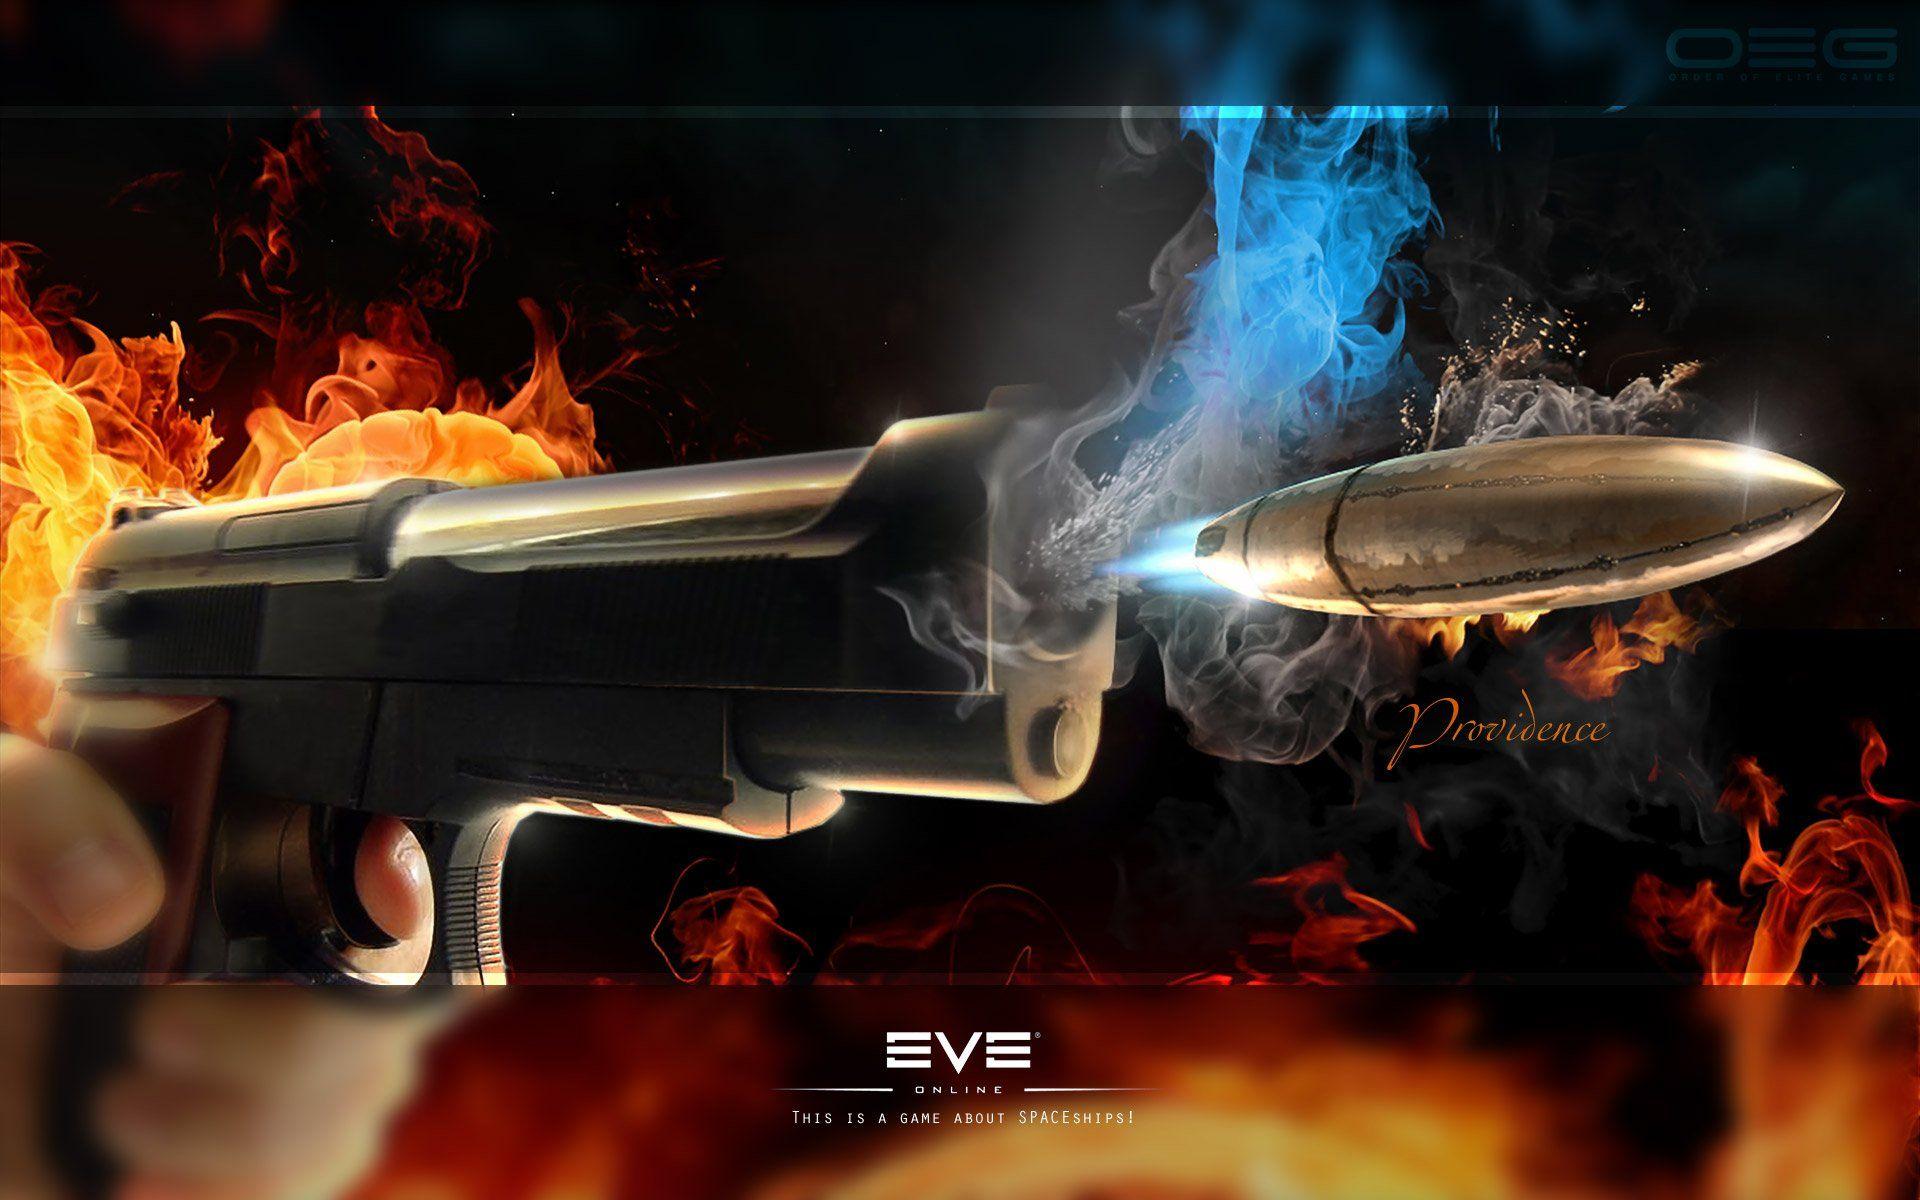 colors, guns, art, amazing photo, abstract, vector image, fire, full